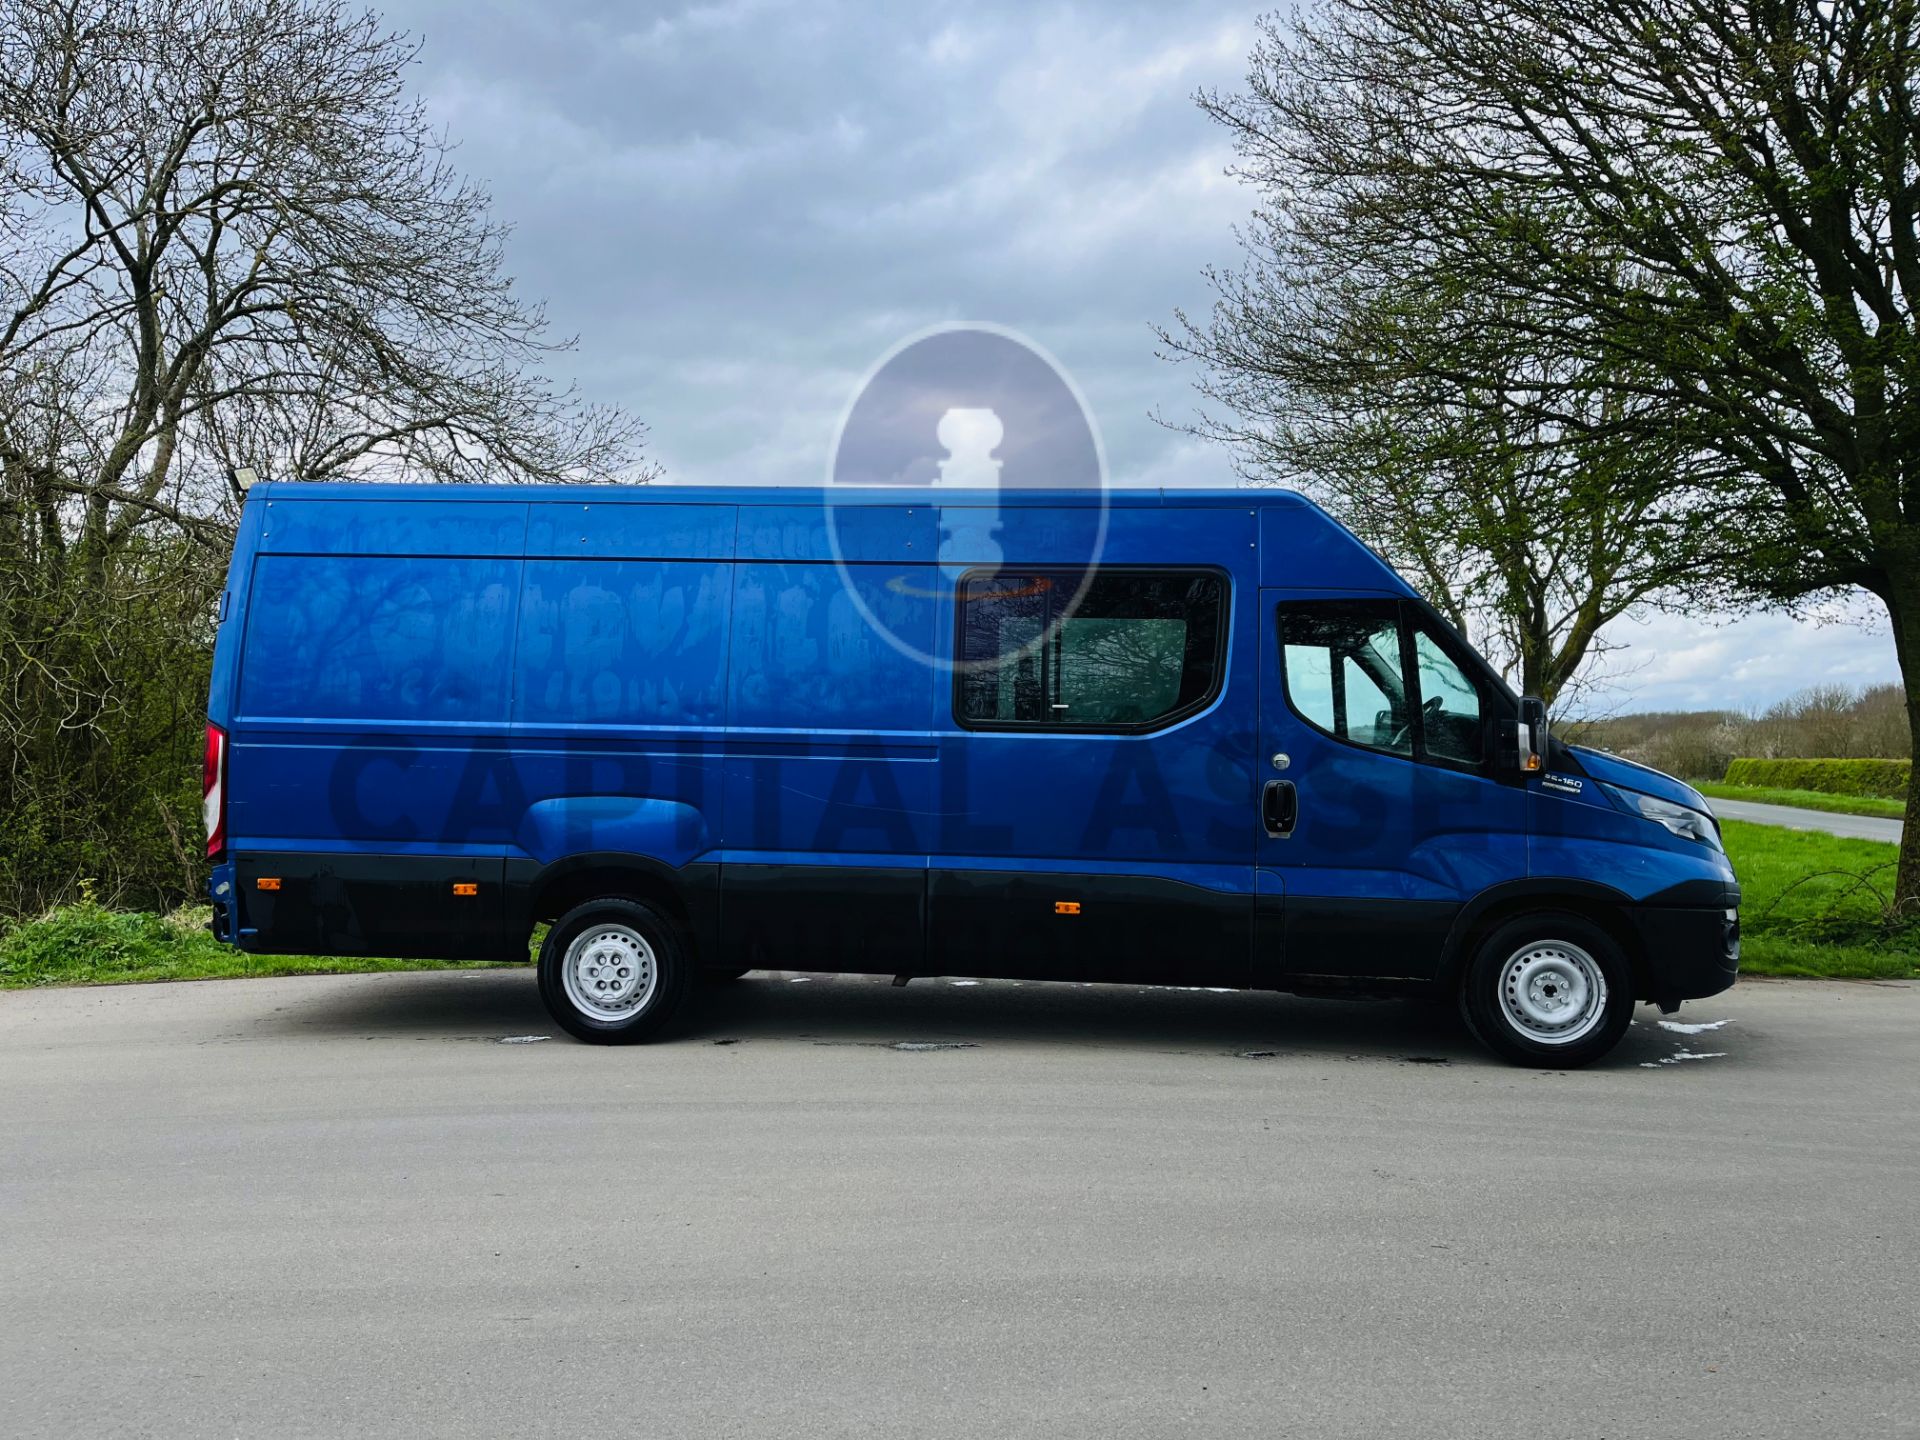 (ON SALE) IVECO DAILY 2.3TD 35-160 HI-MATIC XLWB *6 SEATER VERSION* 18 REG - AIR CON - CRUISE - - Image 11 of 20